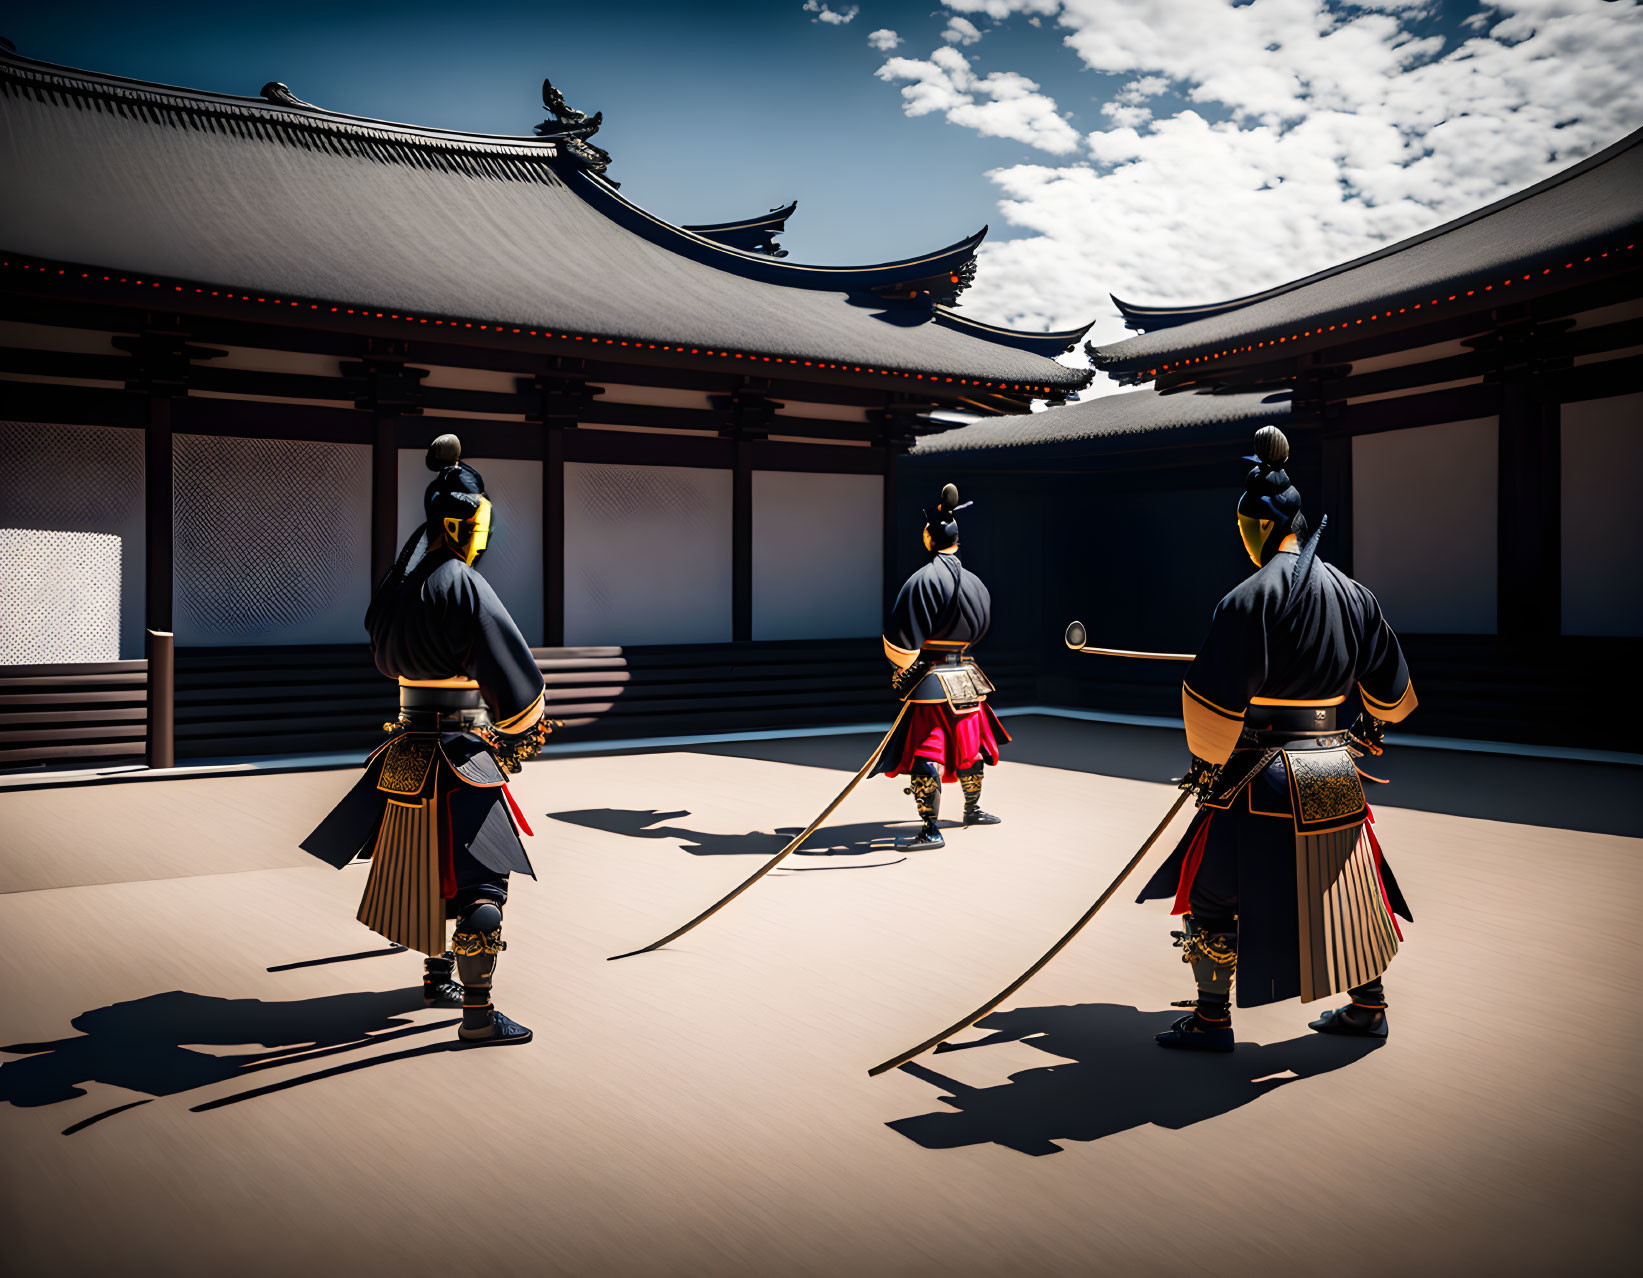 Three samurai warriors in traditional Japanese courtyard under clear blue sky